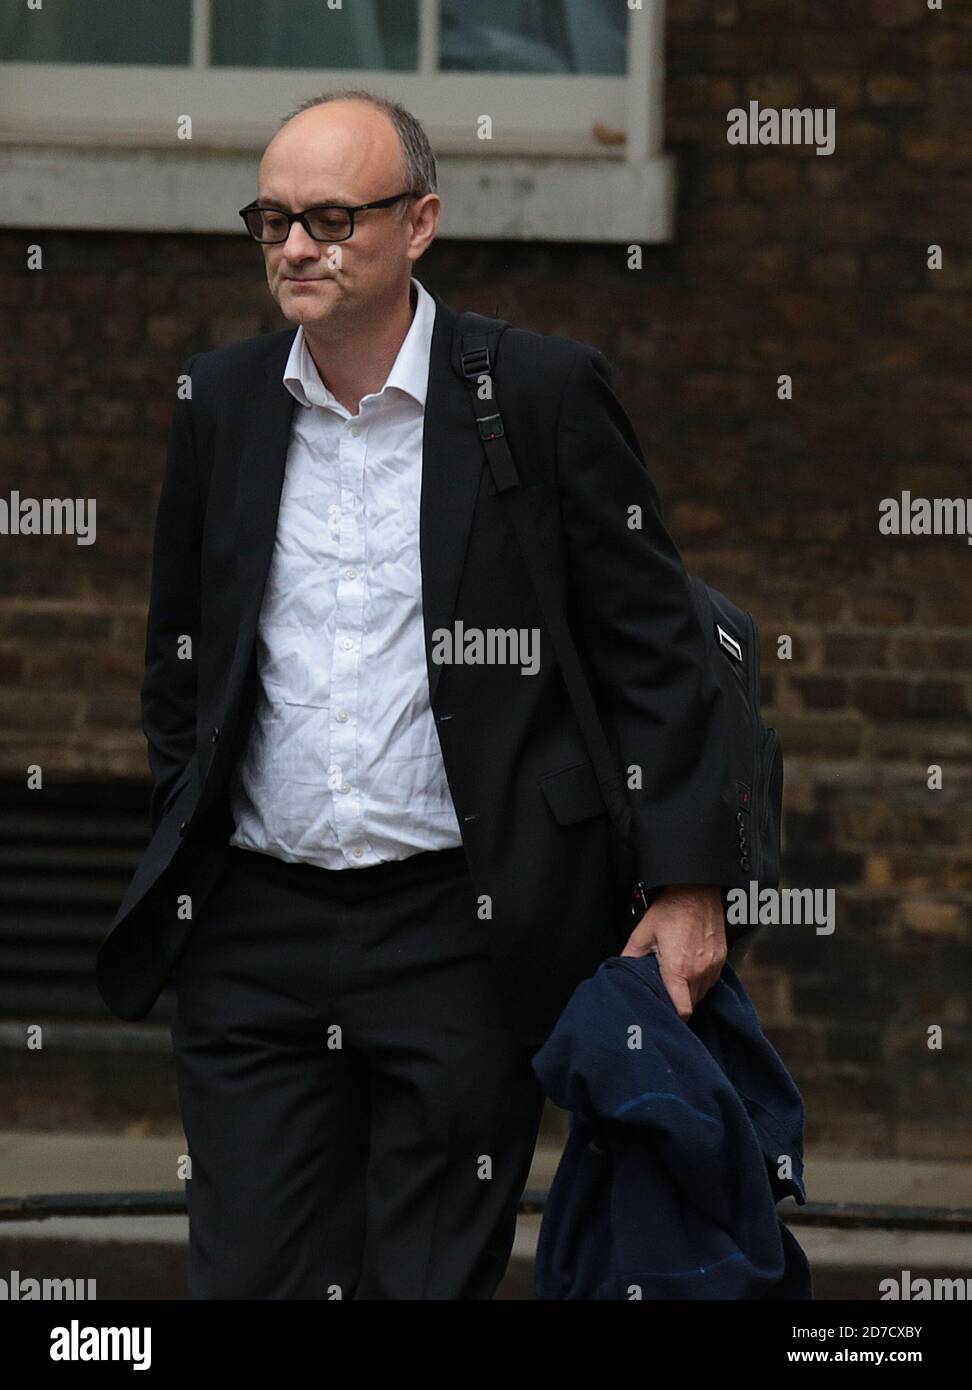 Sep 08, 2020 - London, England, UK - Arrivals for Cabinet Meeting which is being held at Foreign Office Photo Shows: Dominic Cummings Stock Photo